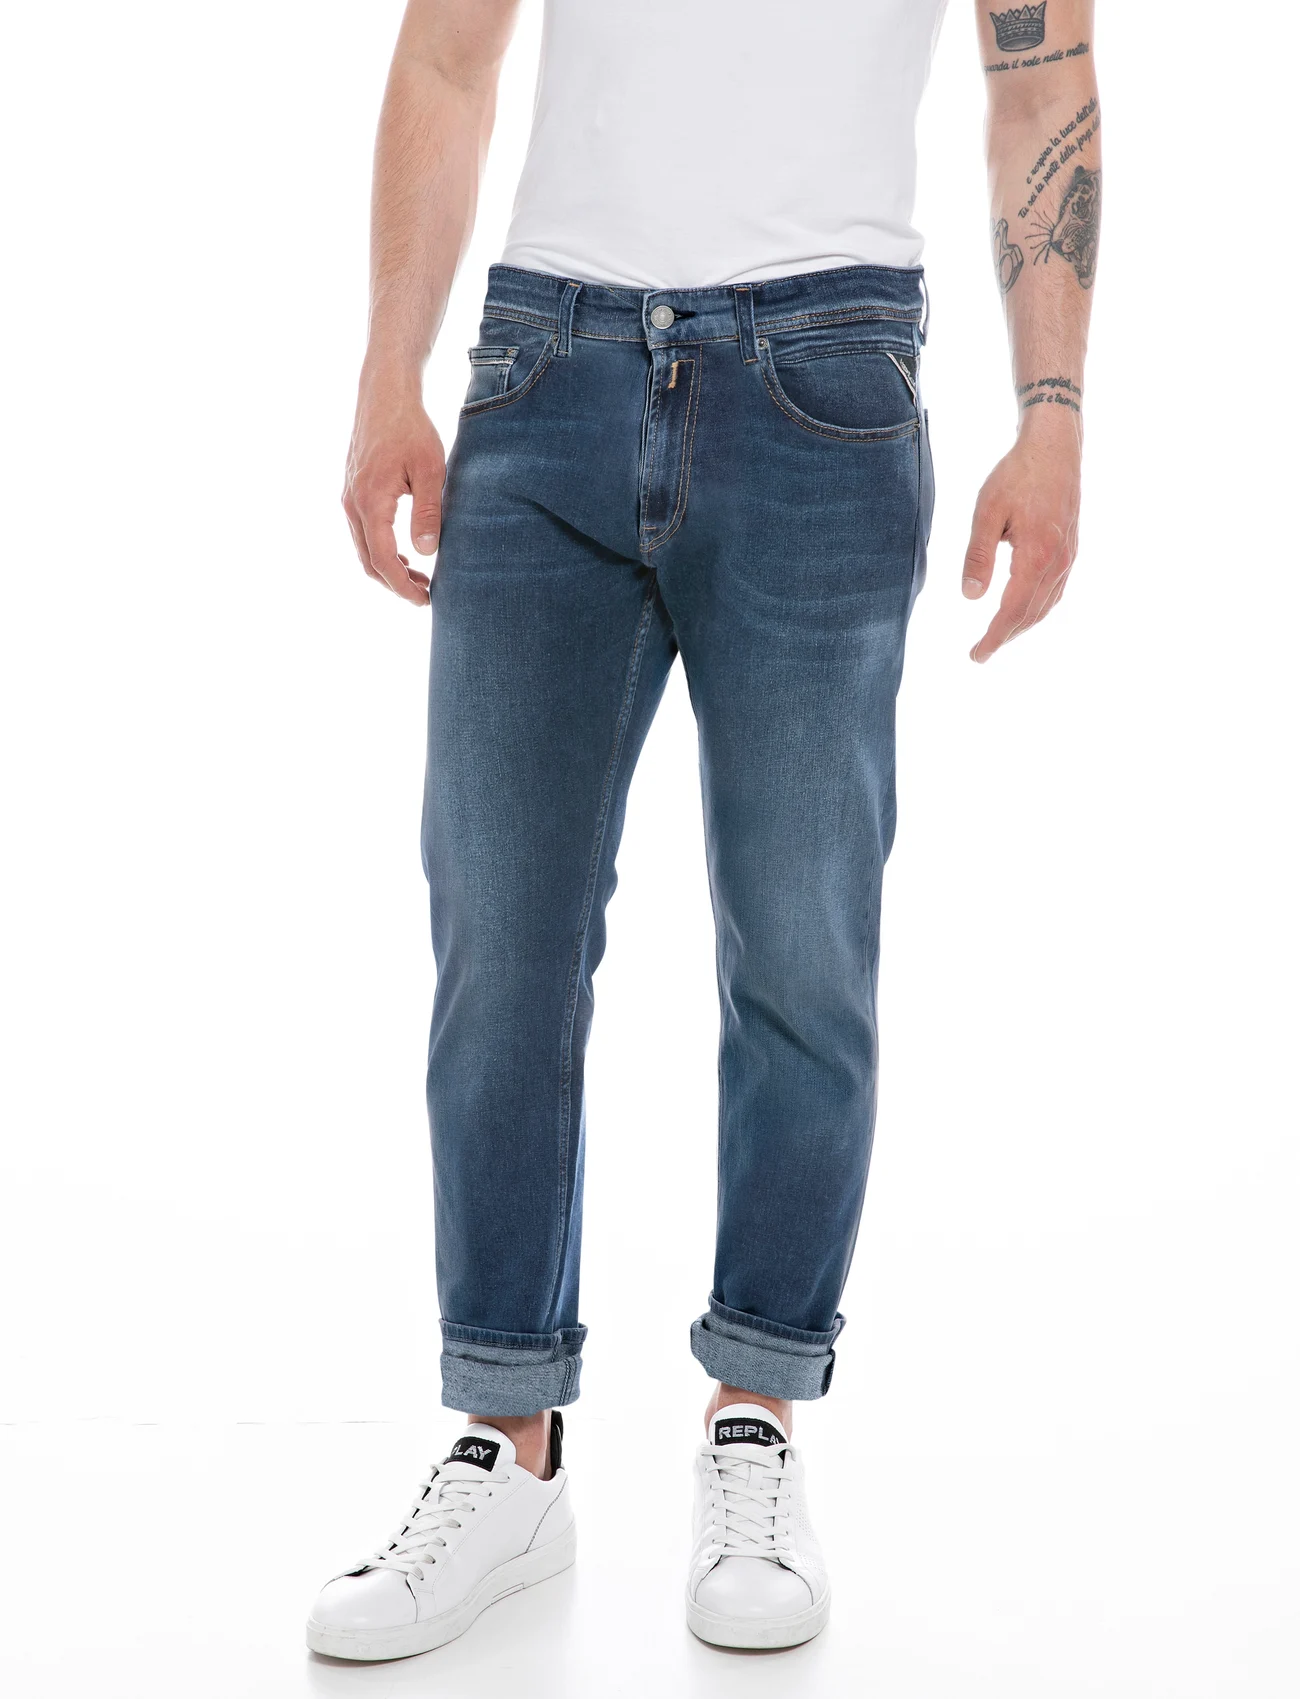 Replay - GROVER Trousers STRAIGHT 99 Denim - slim jeans - blue - 0